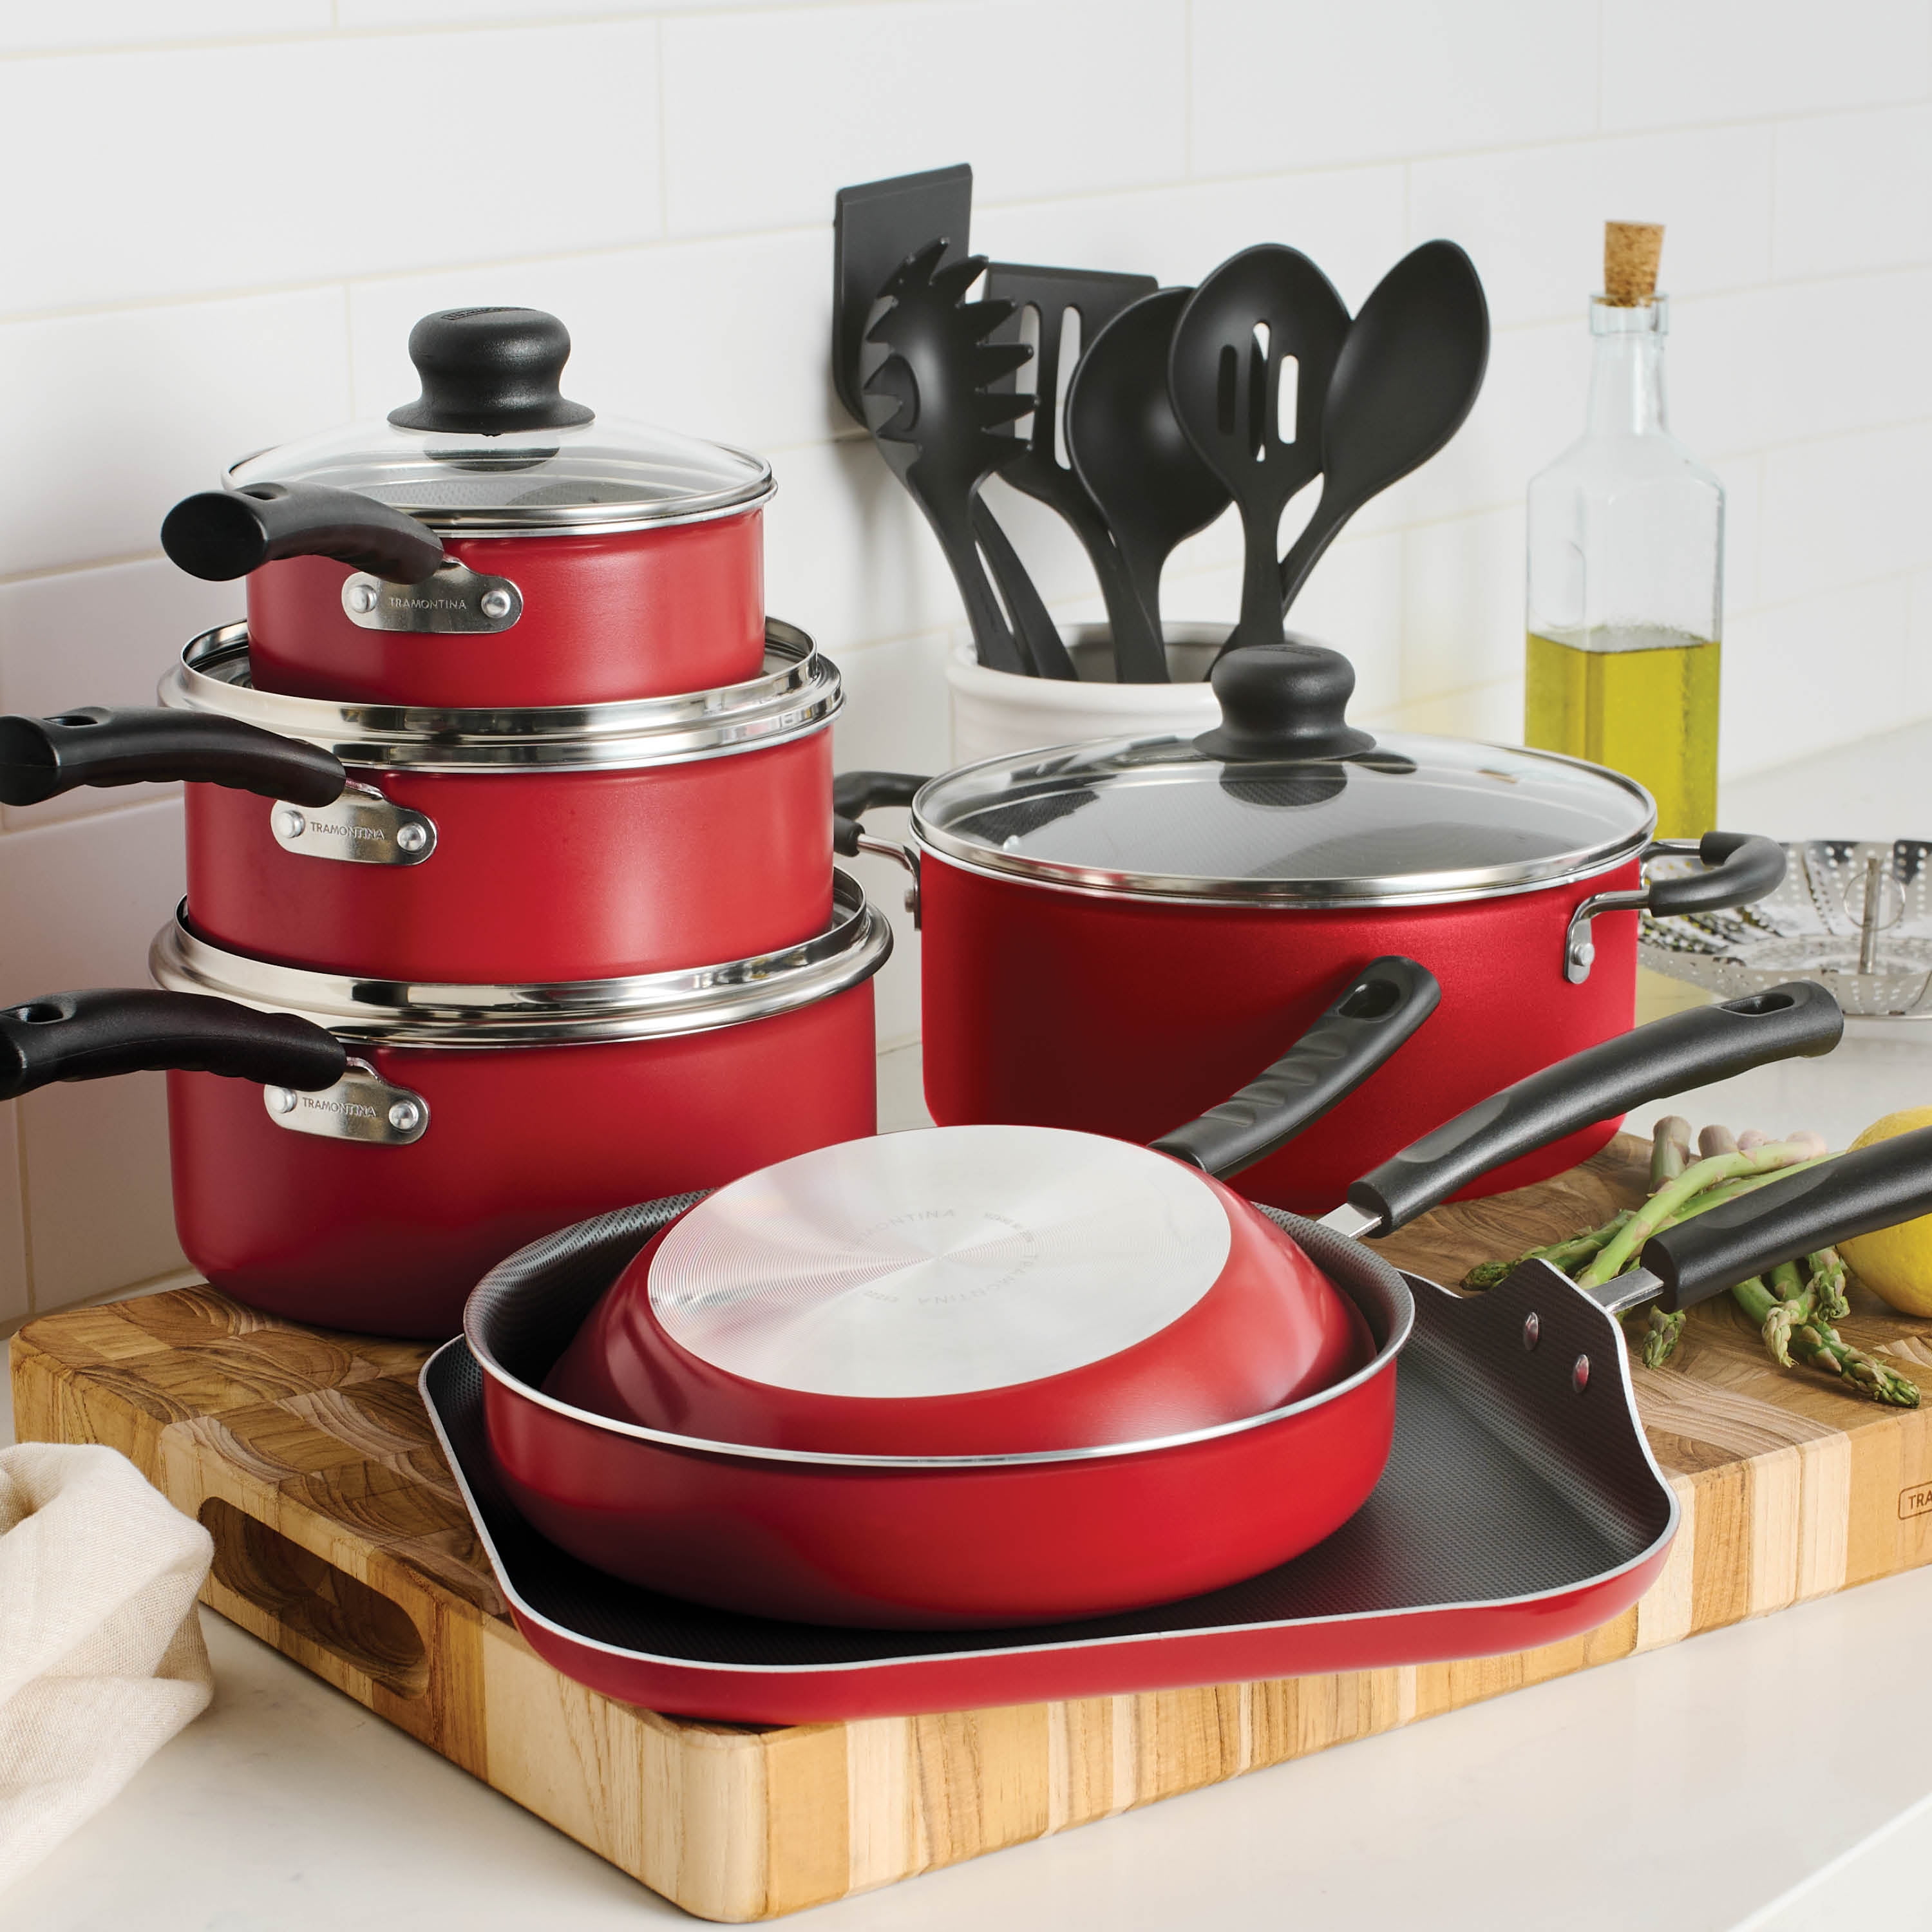 Tramontina Primaware 18 Piece Non-stick Cookware Set, Red – A Belle Decor